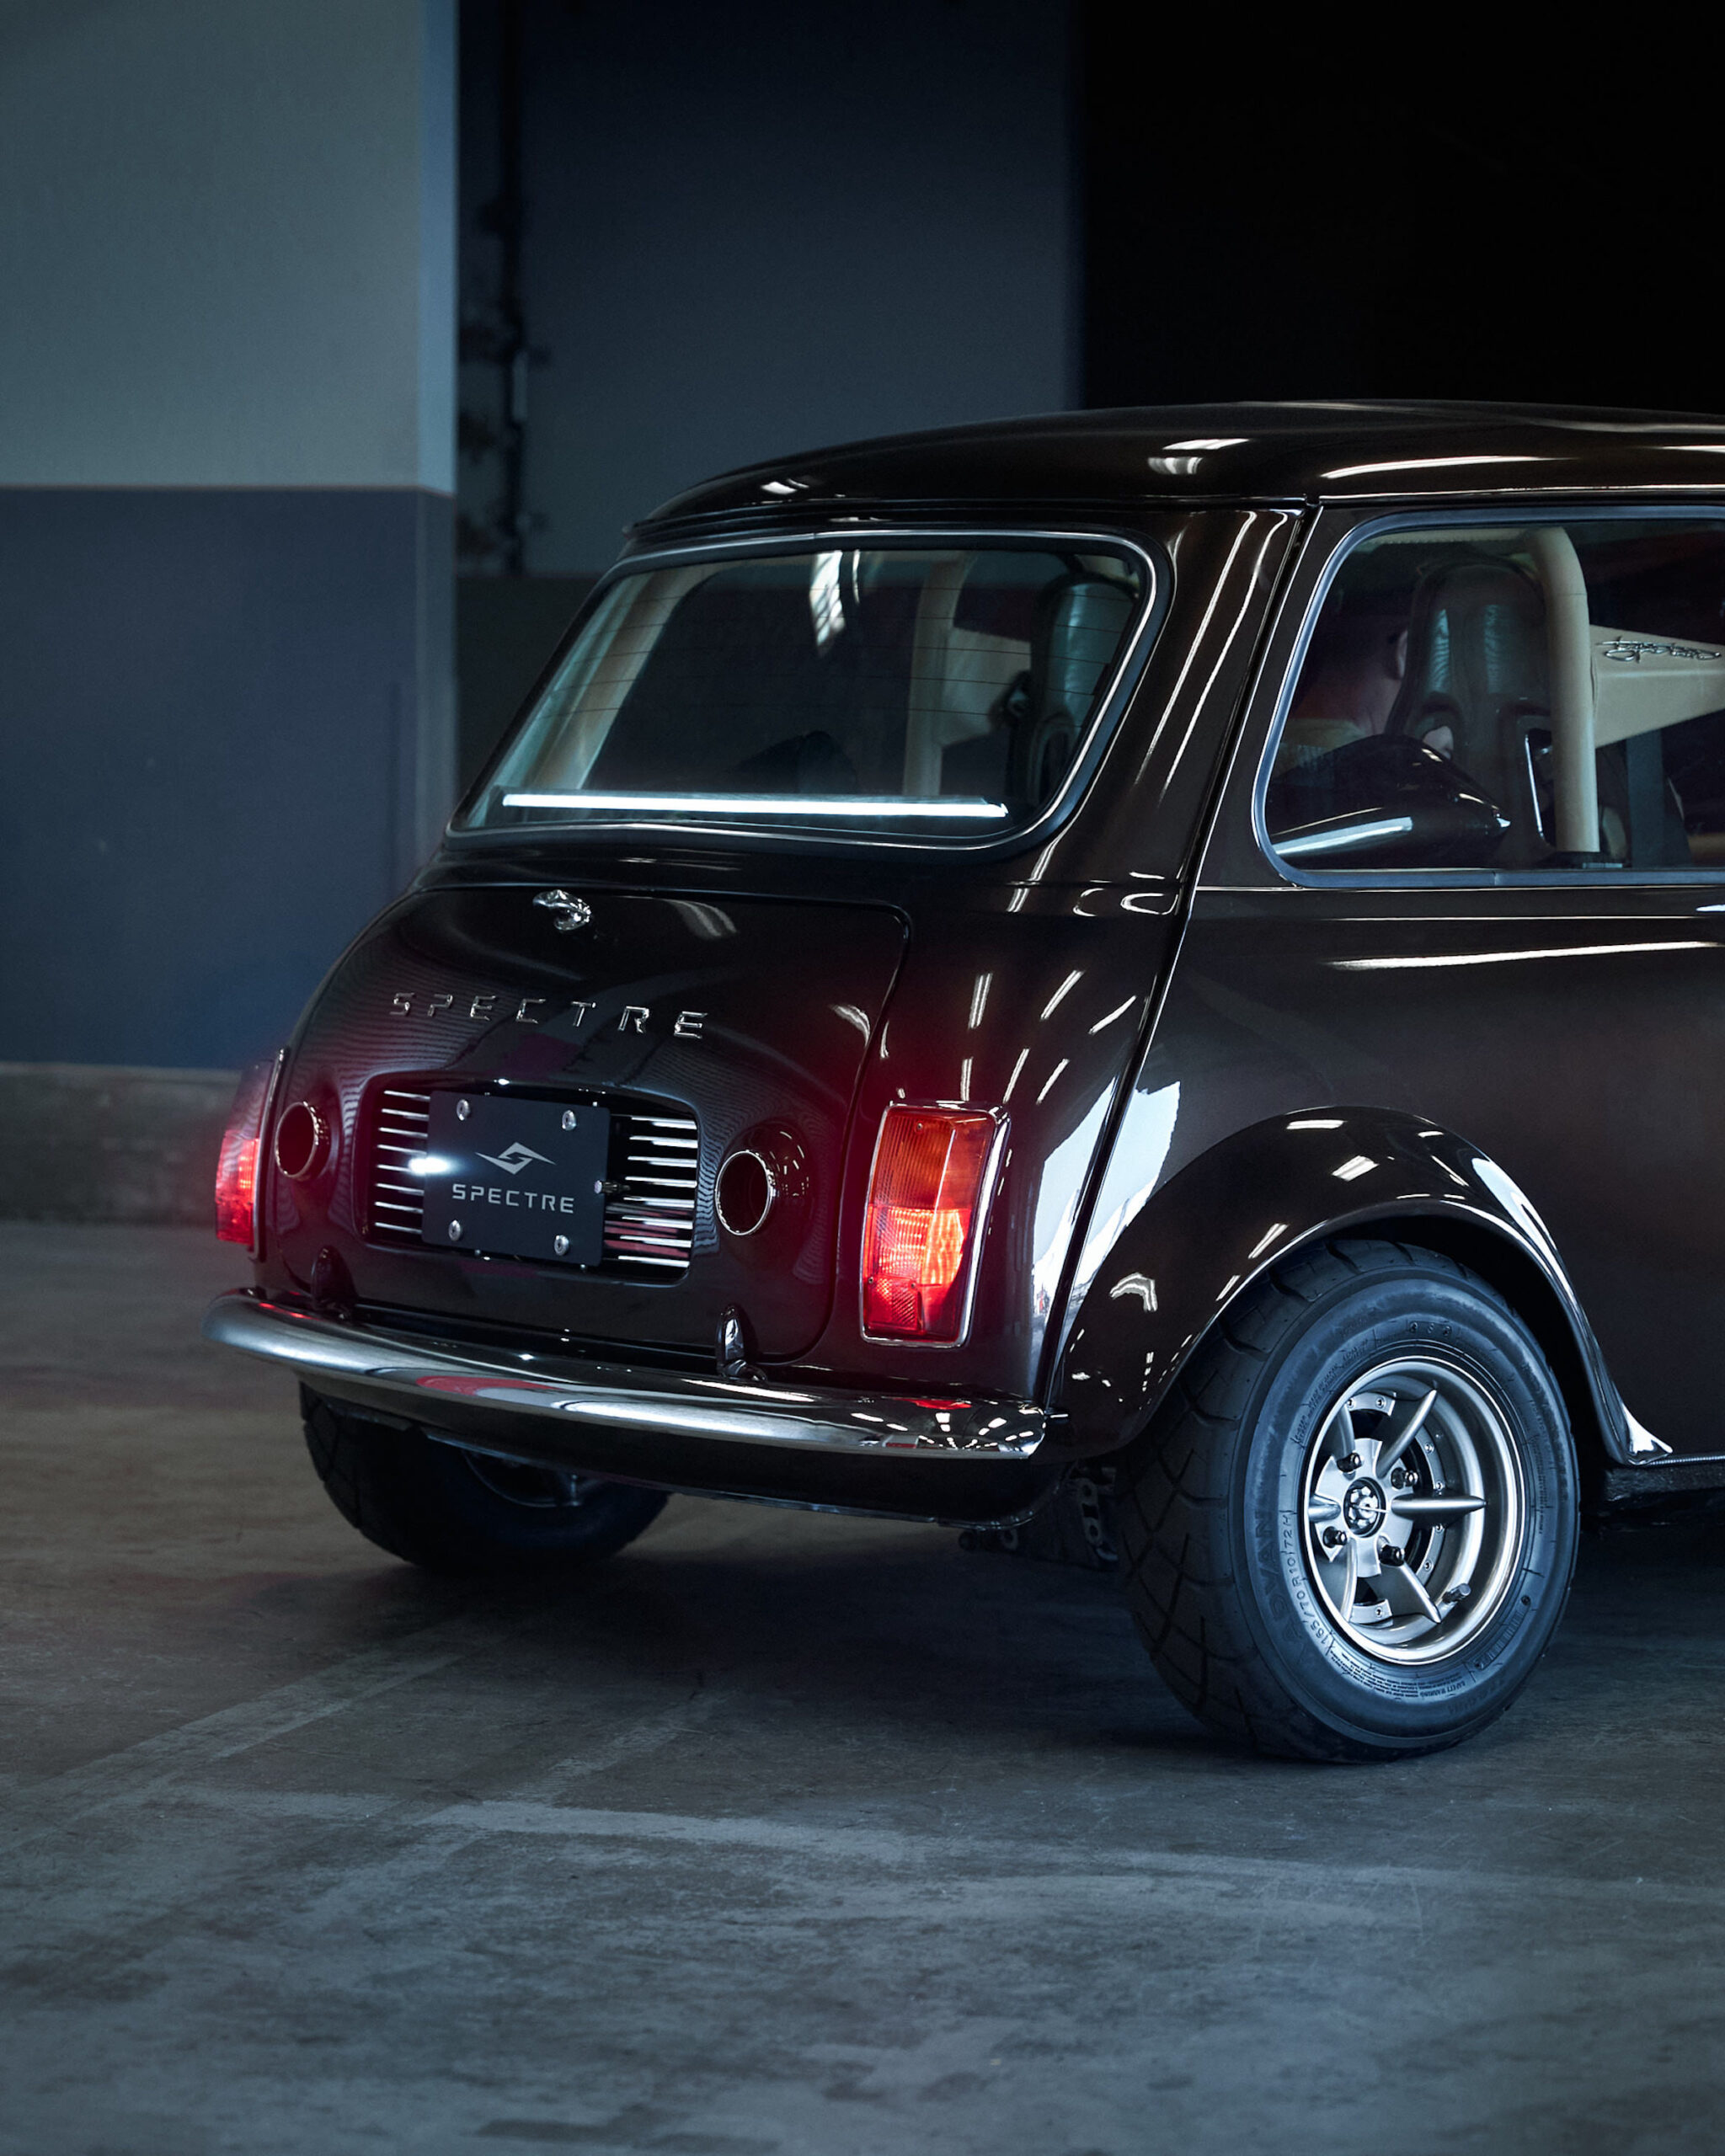 The Spectre Type 10 – A 230 RWHP Mid-Engined Mini Supercar